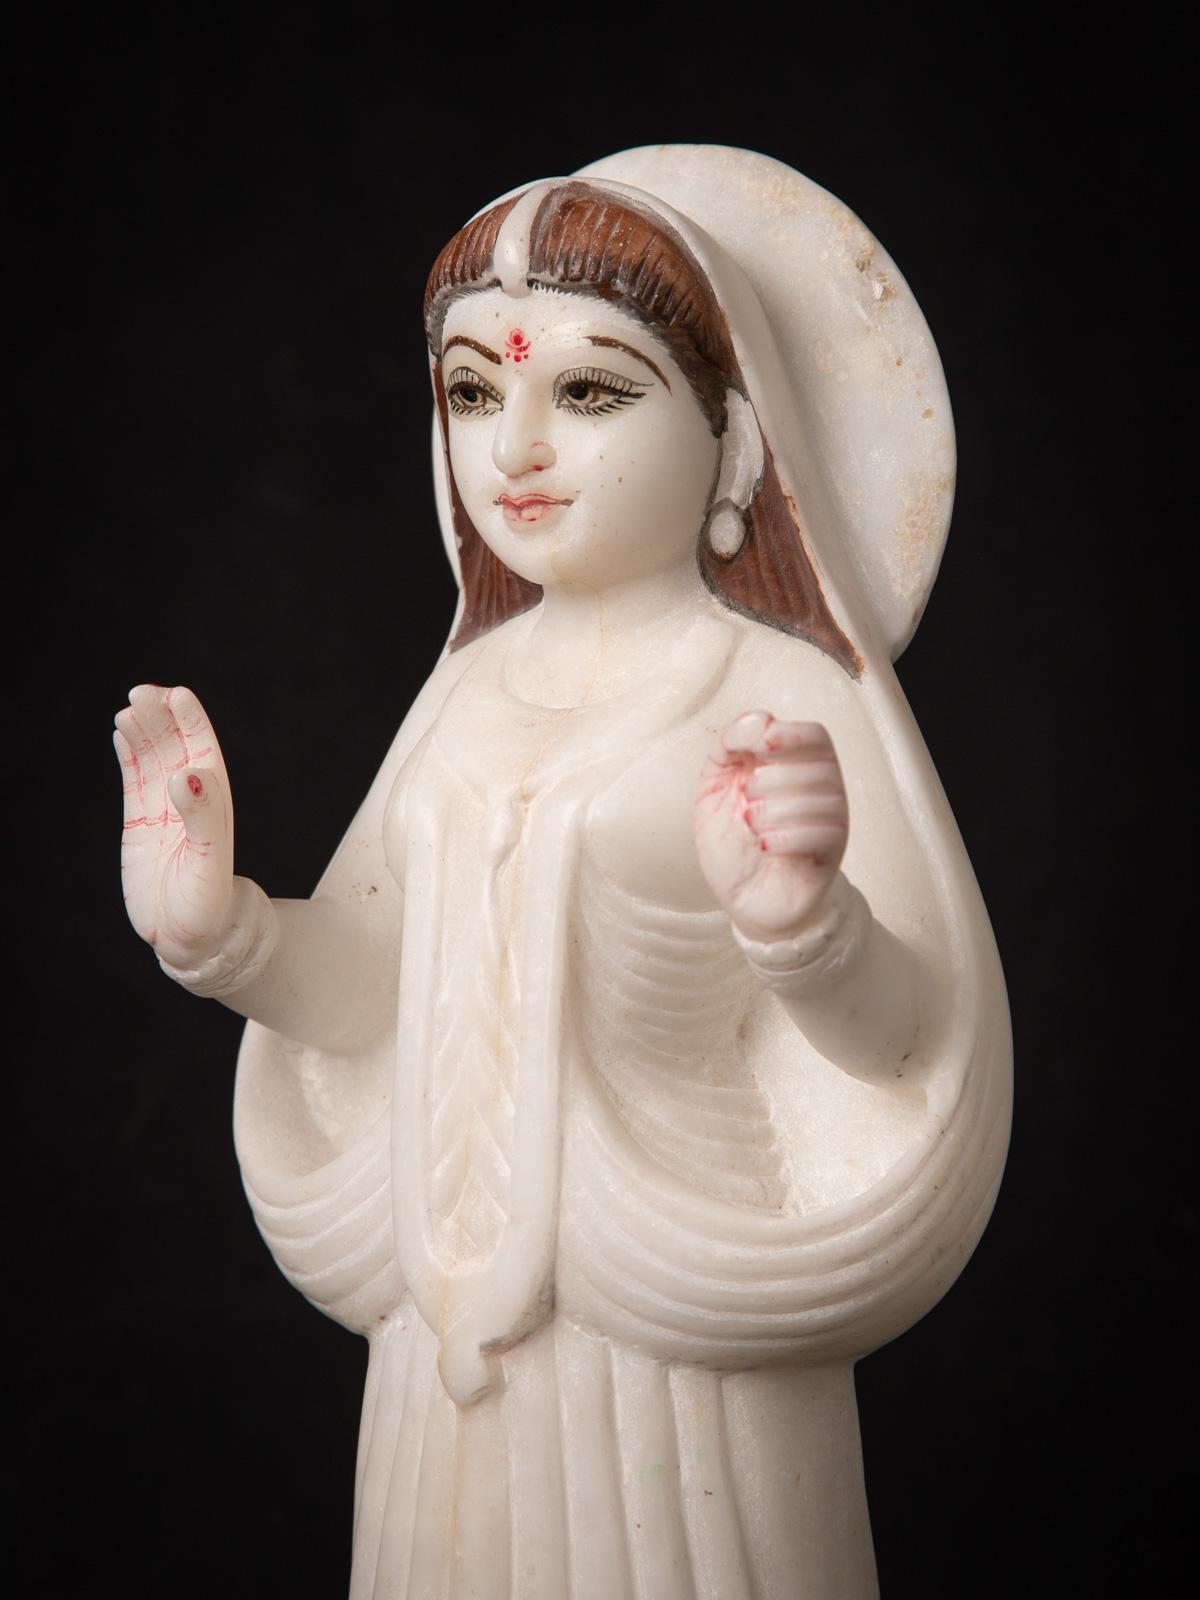 Middle 20th century Old Indian marble Khodiyar mata statue from India  1